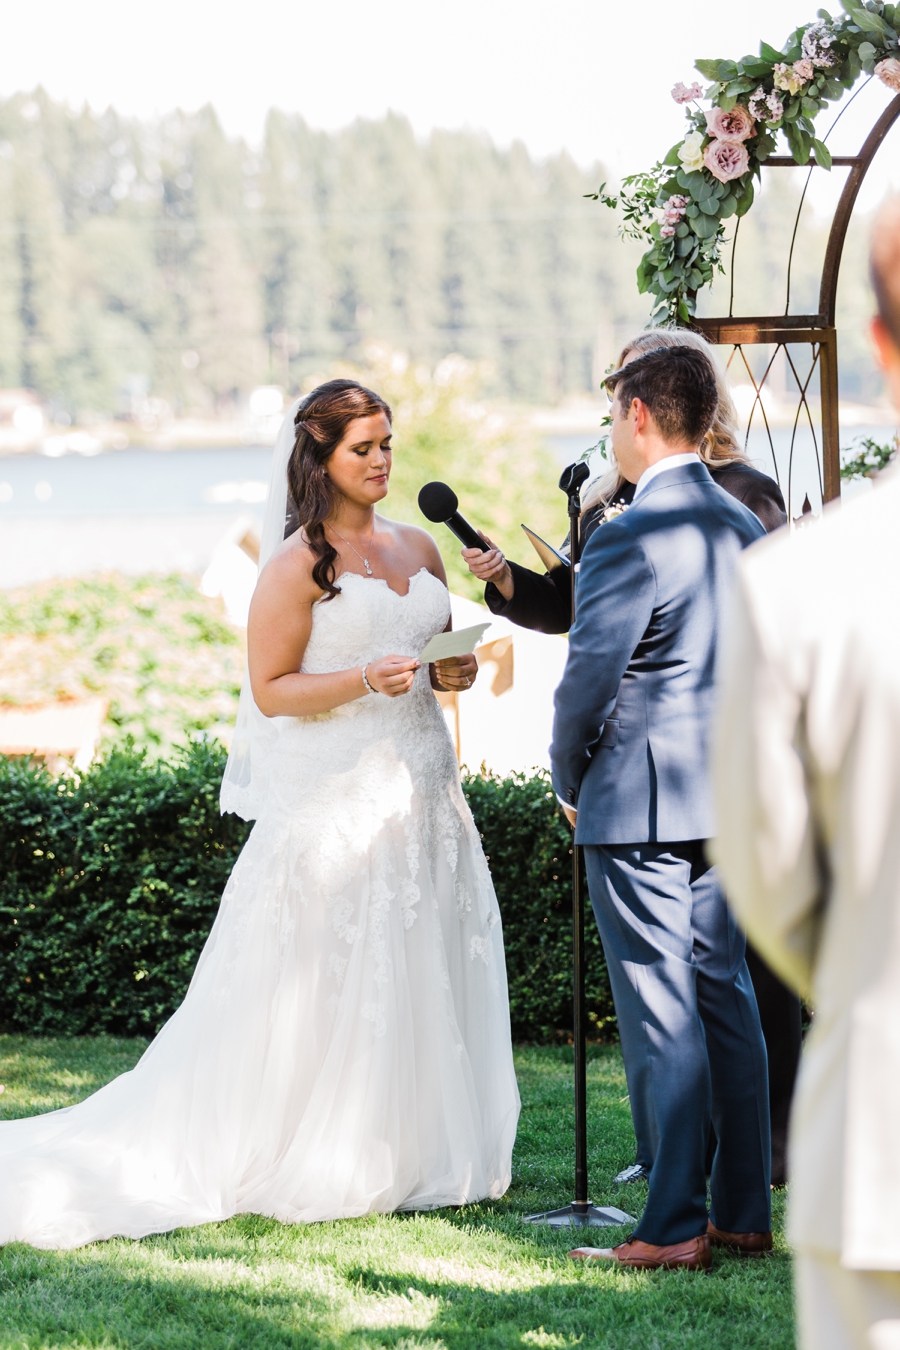 Wedding ceremony at Snohomish wedding venue Green Gates at Flowing Lake by Seattle wedding photographer Amy Galbraith